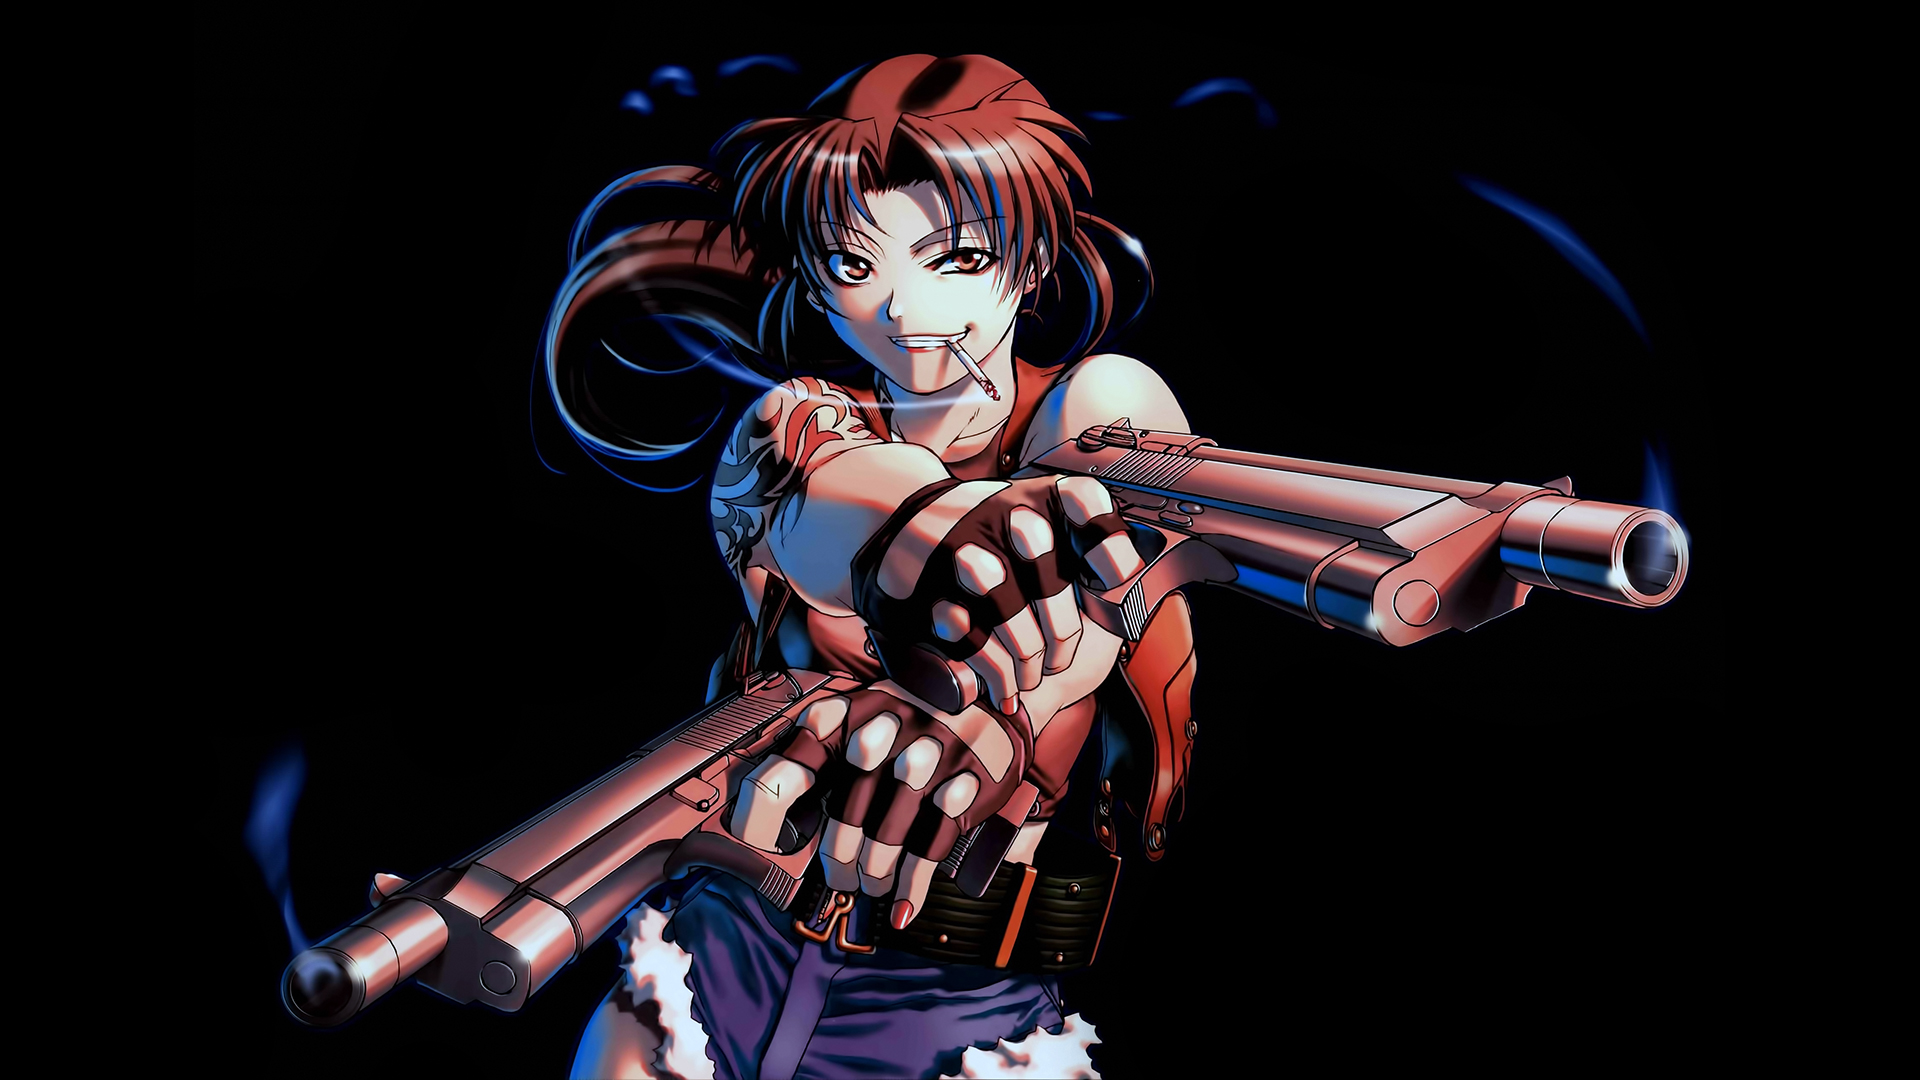 Black lagoon moderately pictures